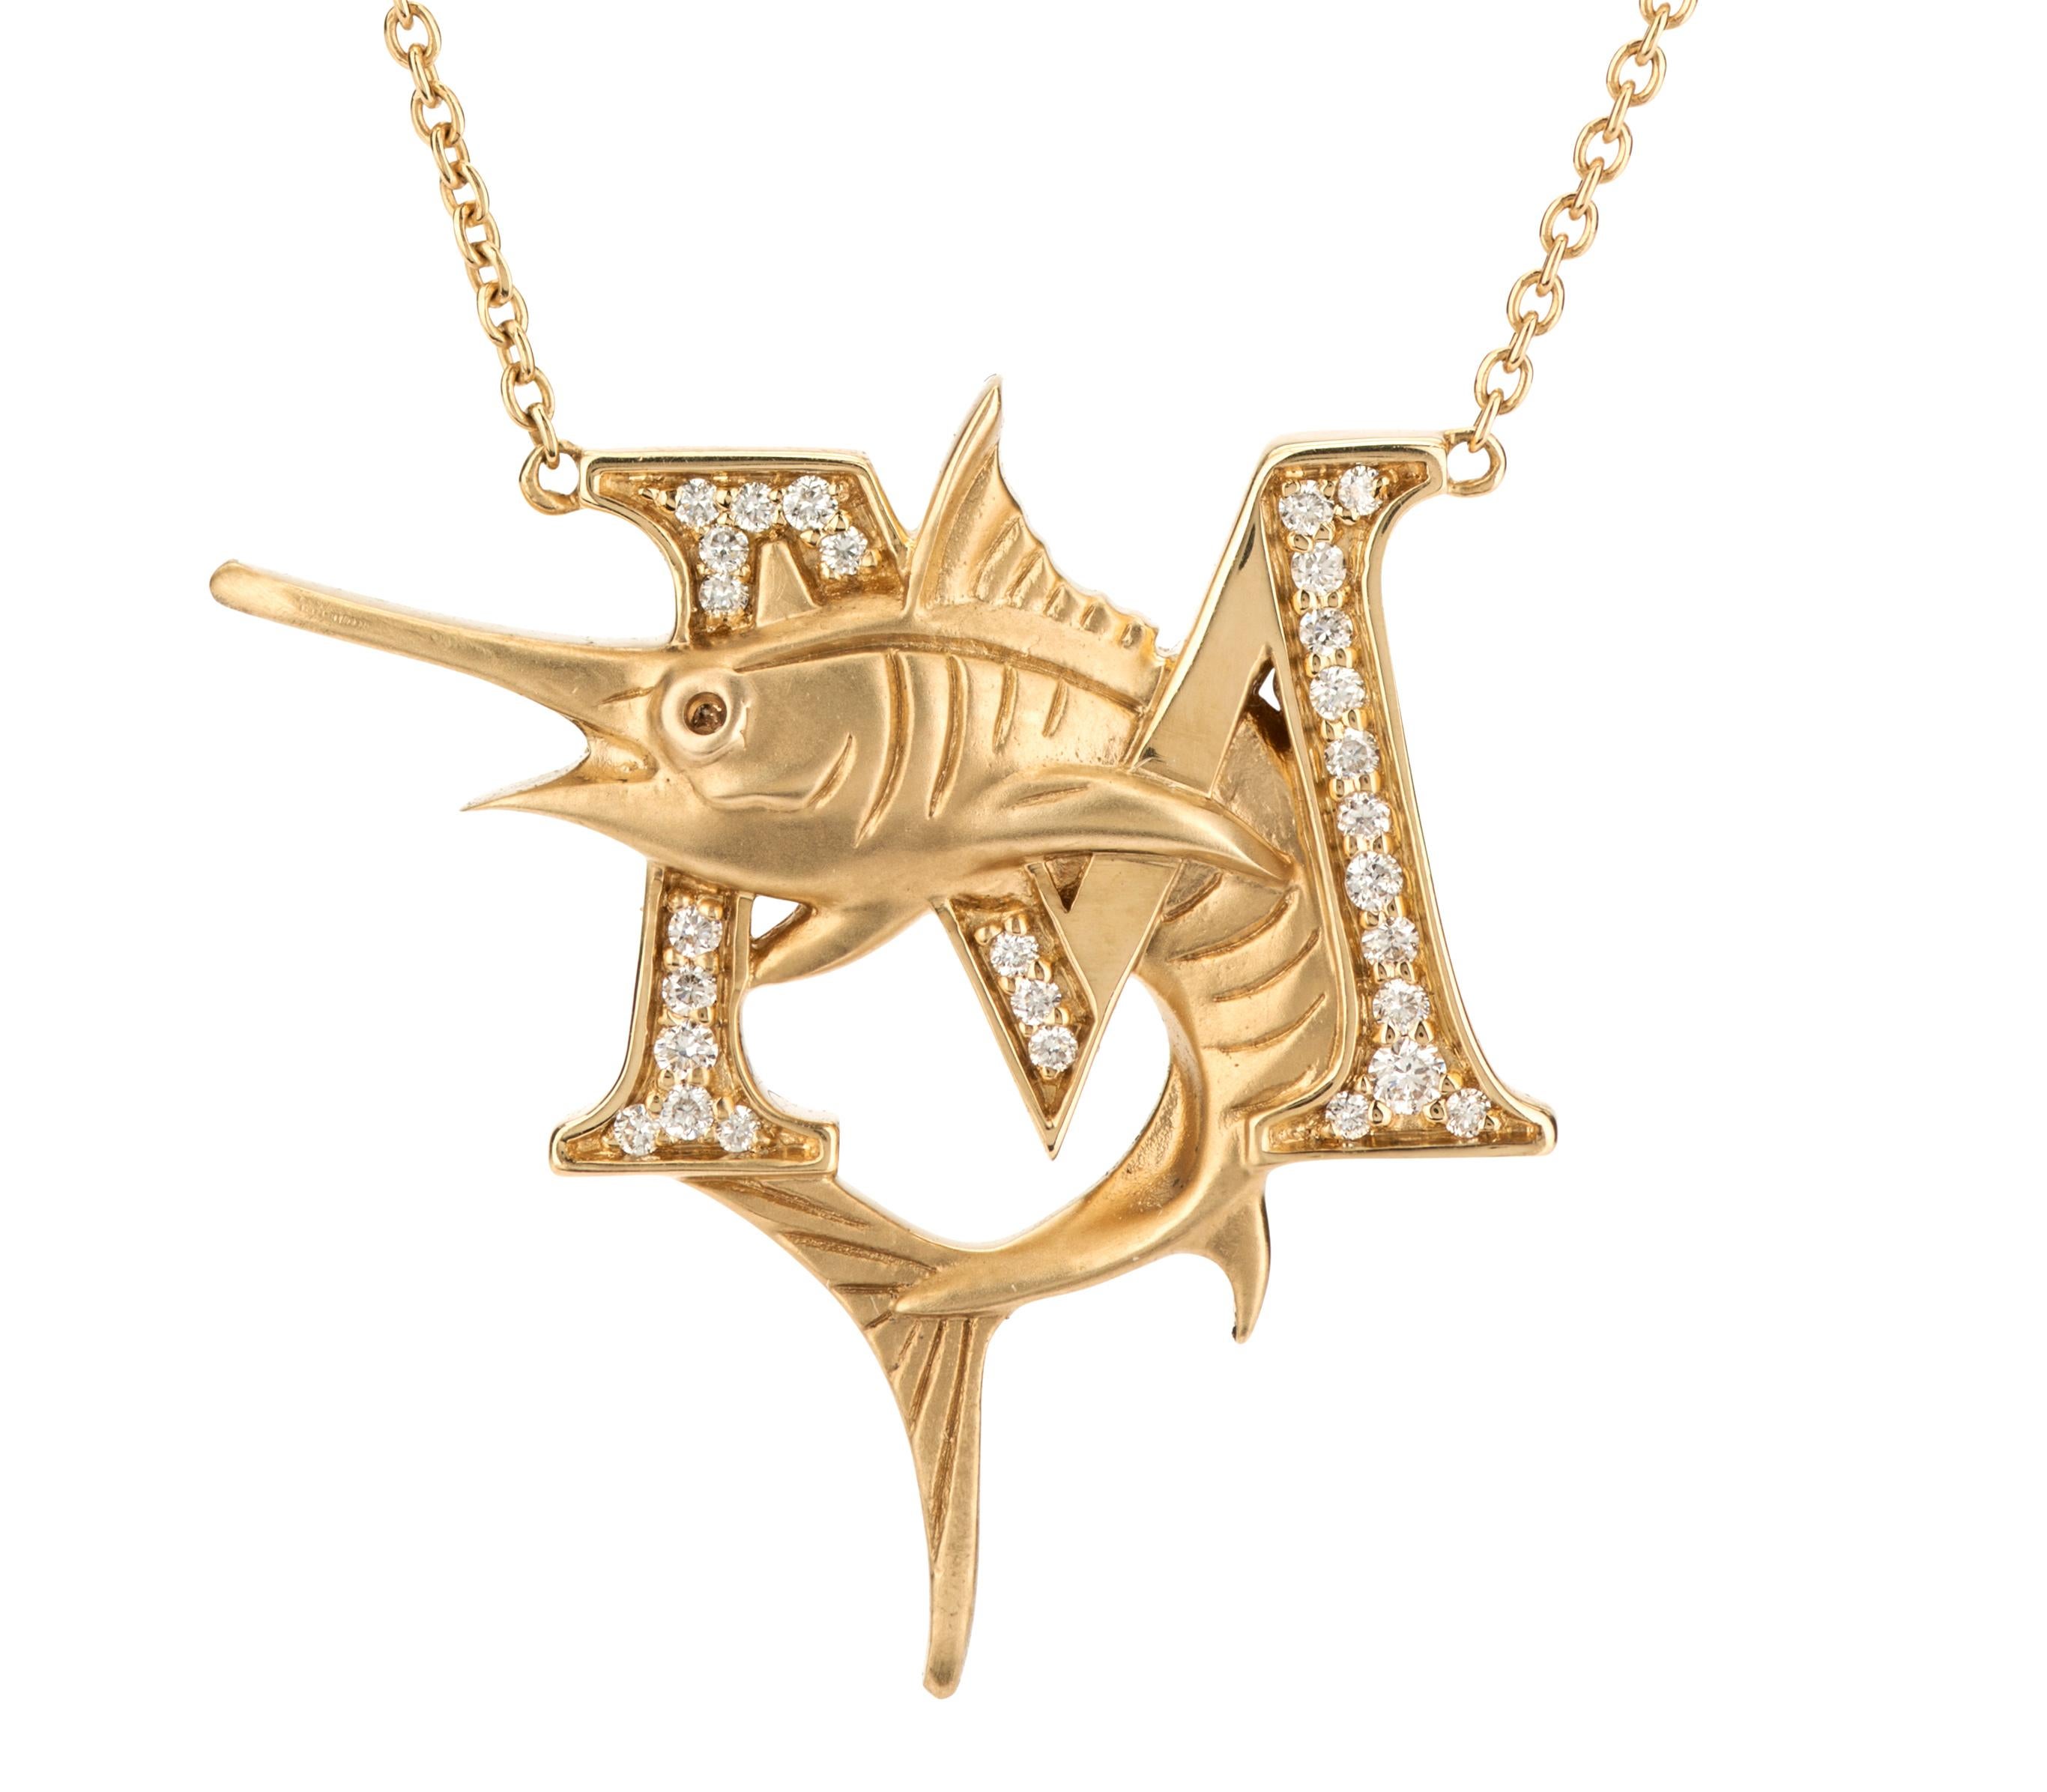 Uncover the mystery and magic of aquatic life with your own Fish Tales necklace and short story book written by the man himself – Stephen Webster. Embrace your initial with our ‘M is for Marlin’ diamond necklace featuring an 18 karat yellow gold